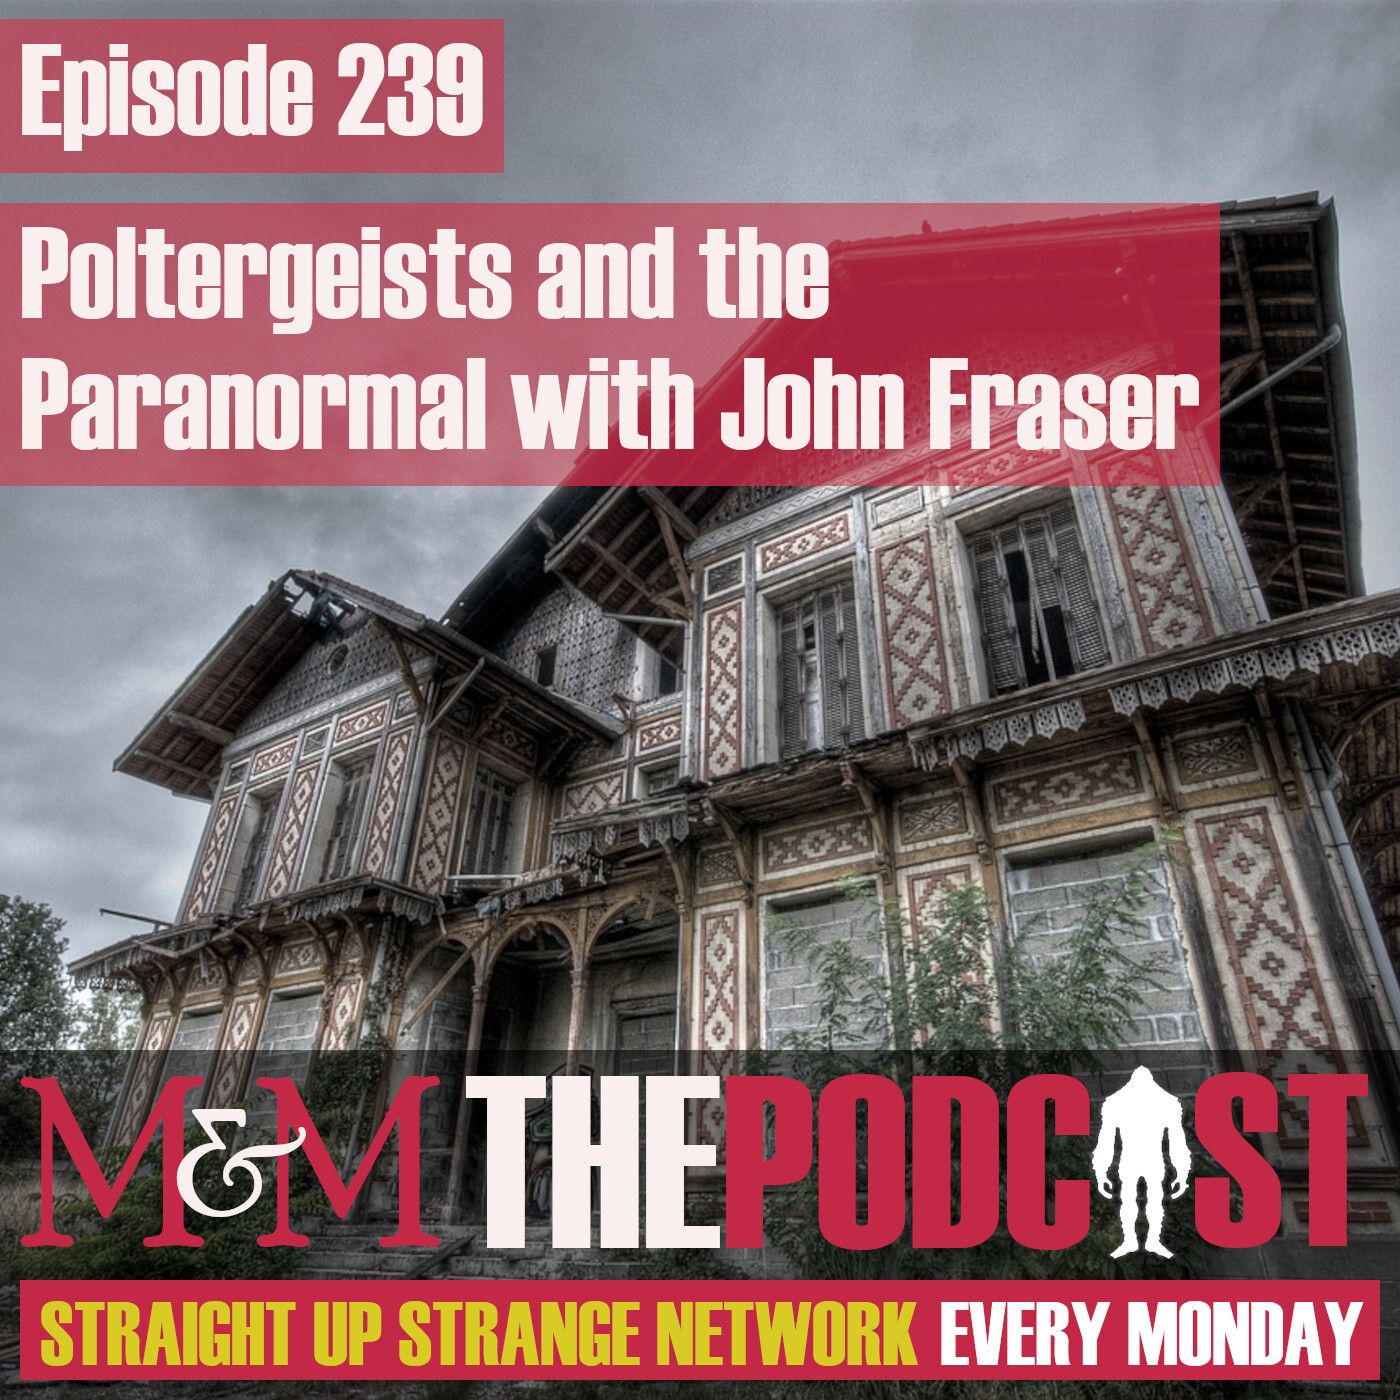 Mysteries and Monsters: Episode 239 Poltergeists and the Paranormal with John Fraser